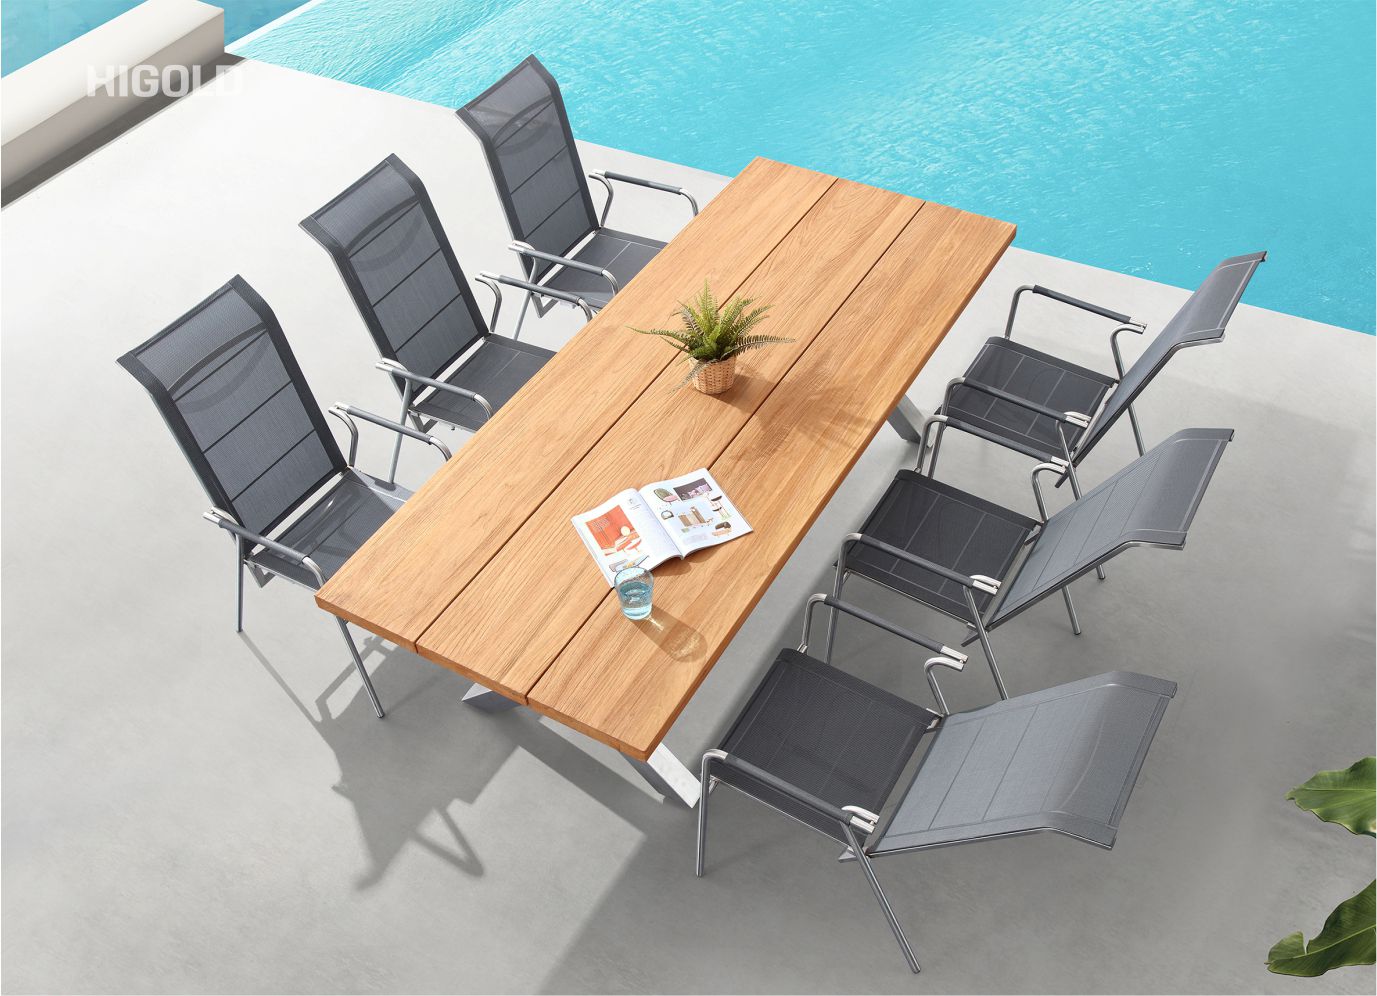 Pioneer 2.0 outdoor dining set for 6 with lounge chairs